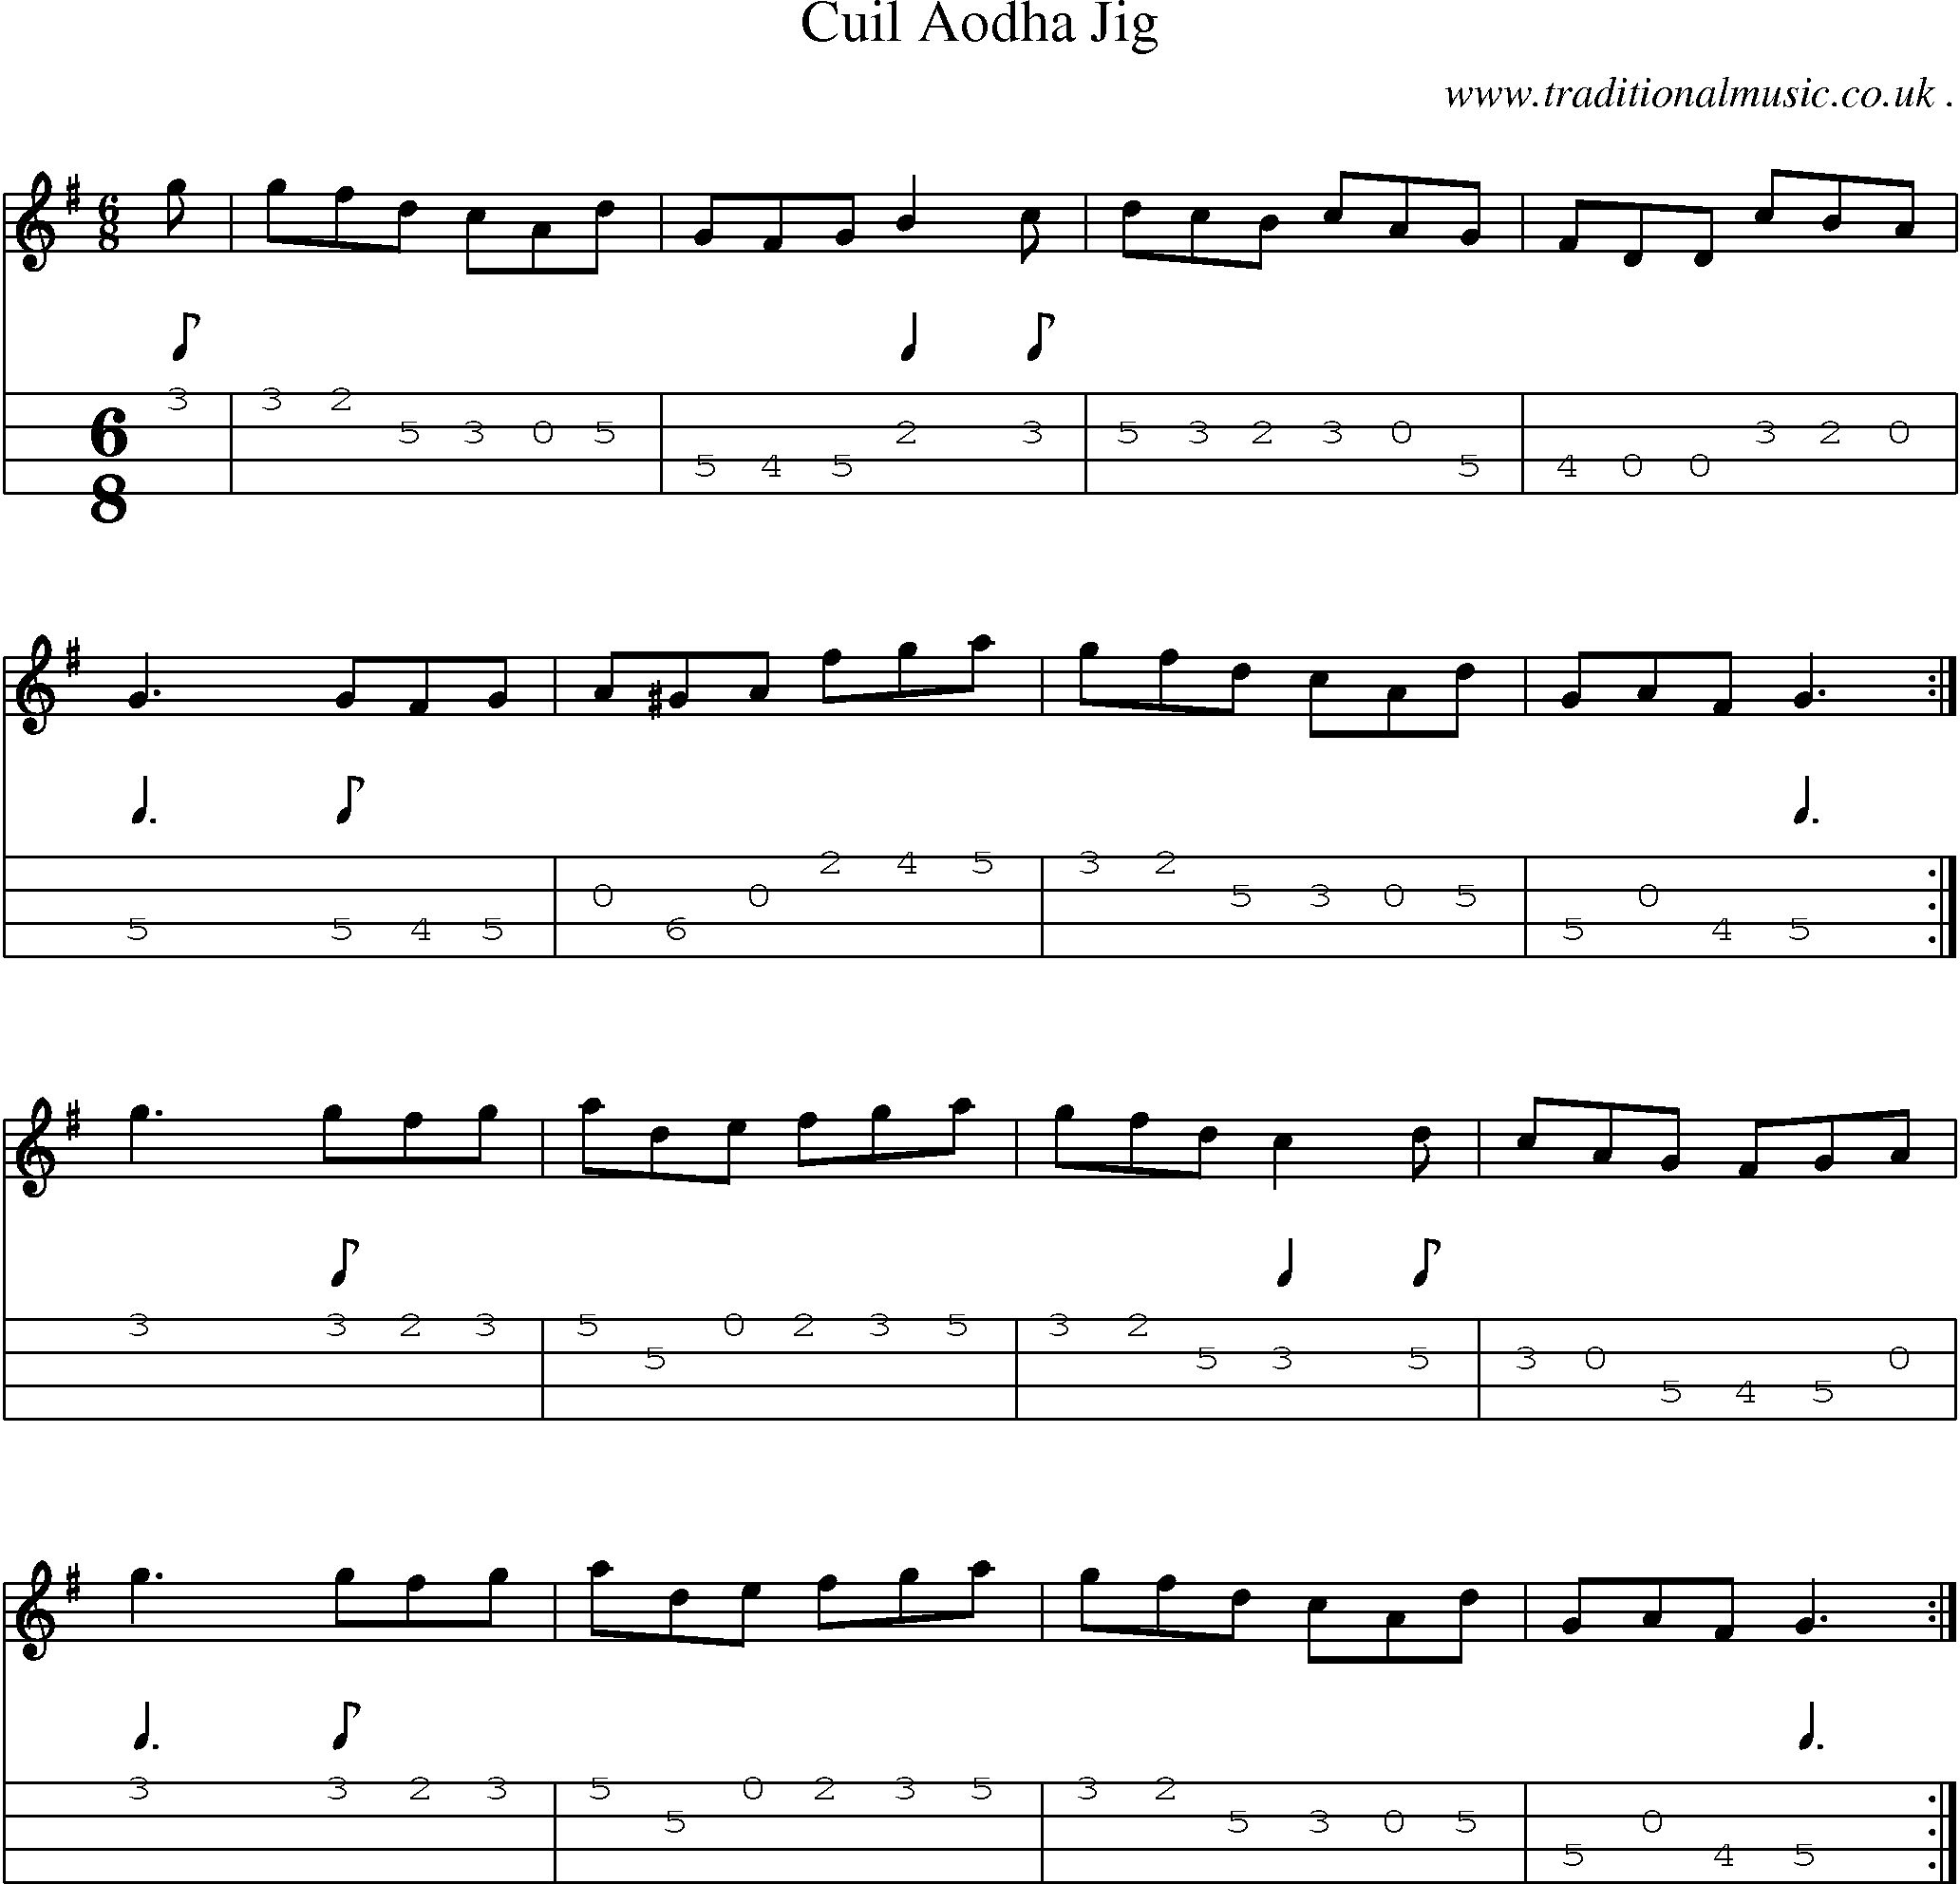 Sheet-Music and Mandolin Tabs for Cuil Aodha Jig